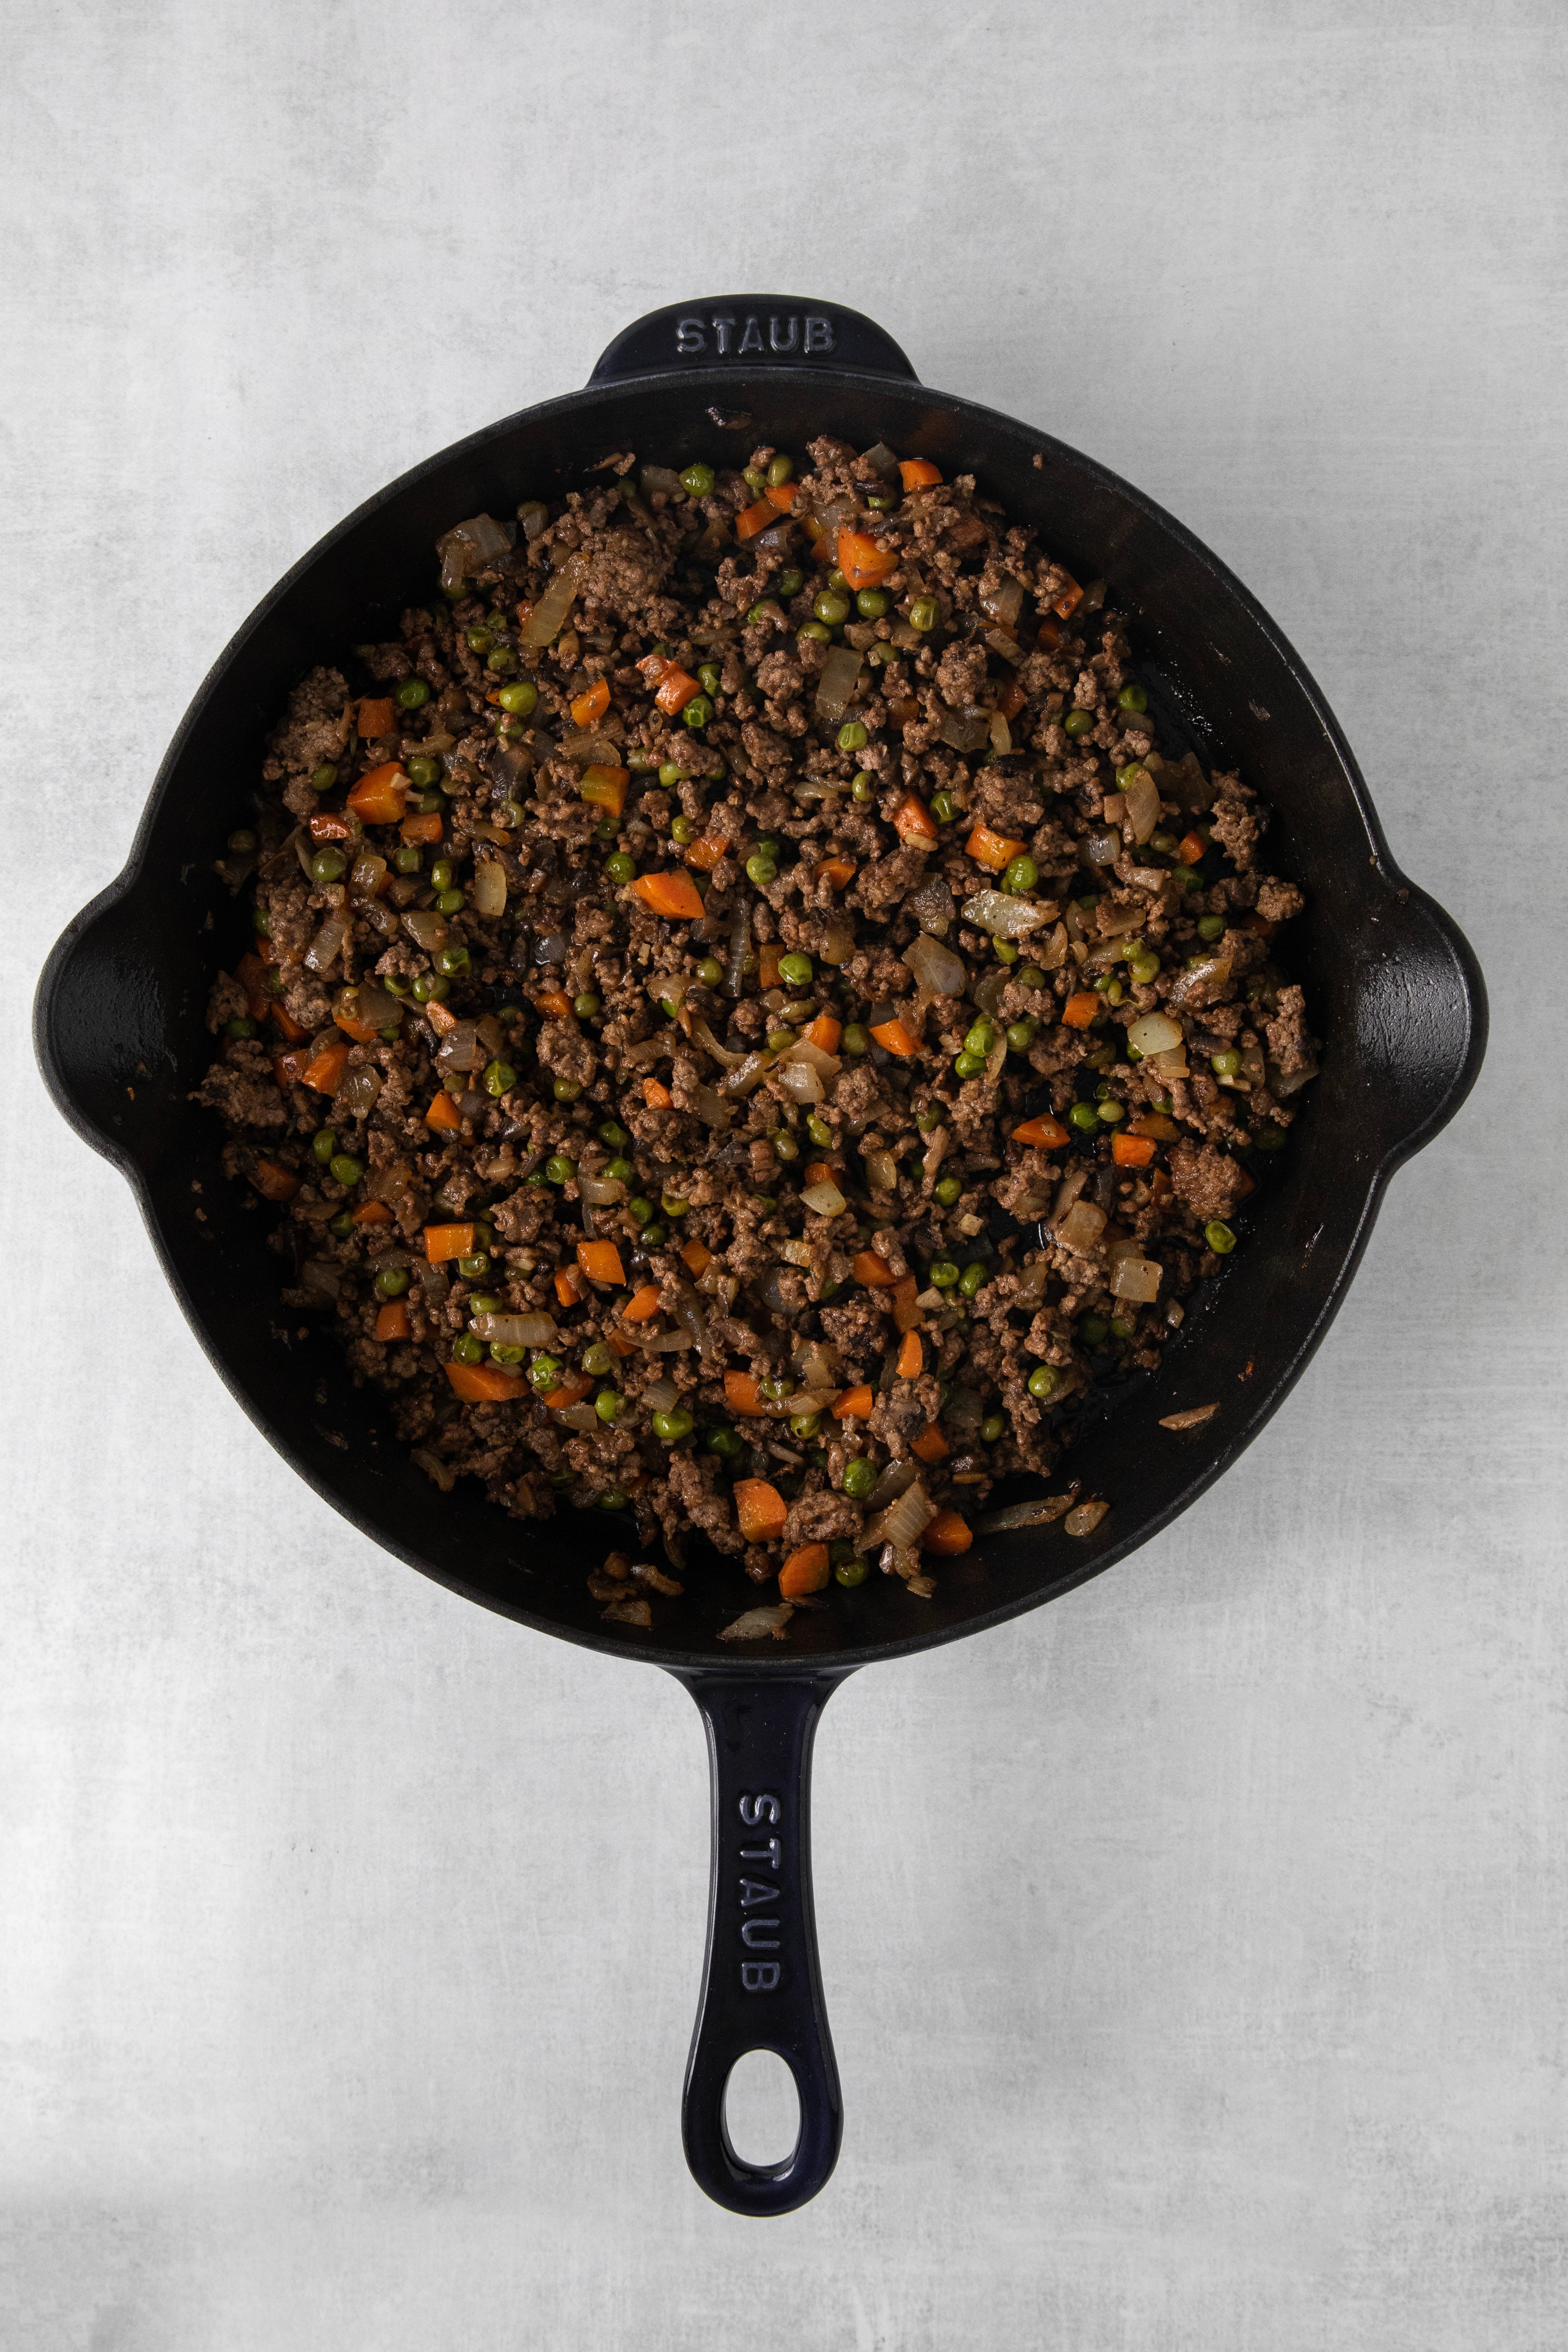 cooked minced meat and vegetables in a pan.